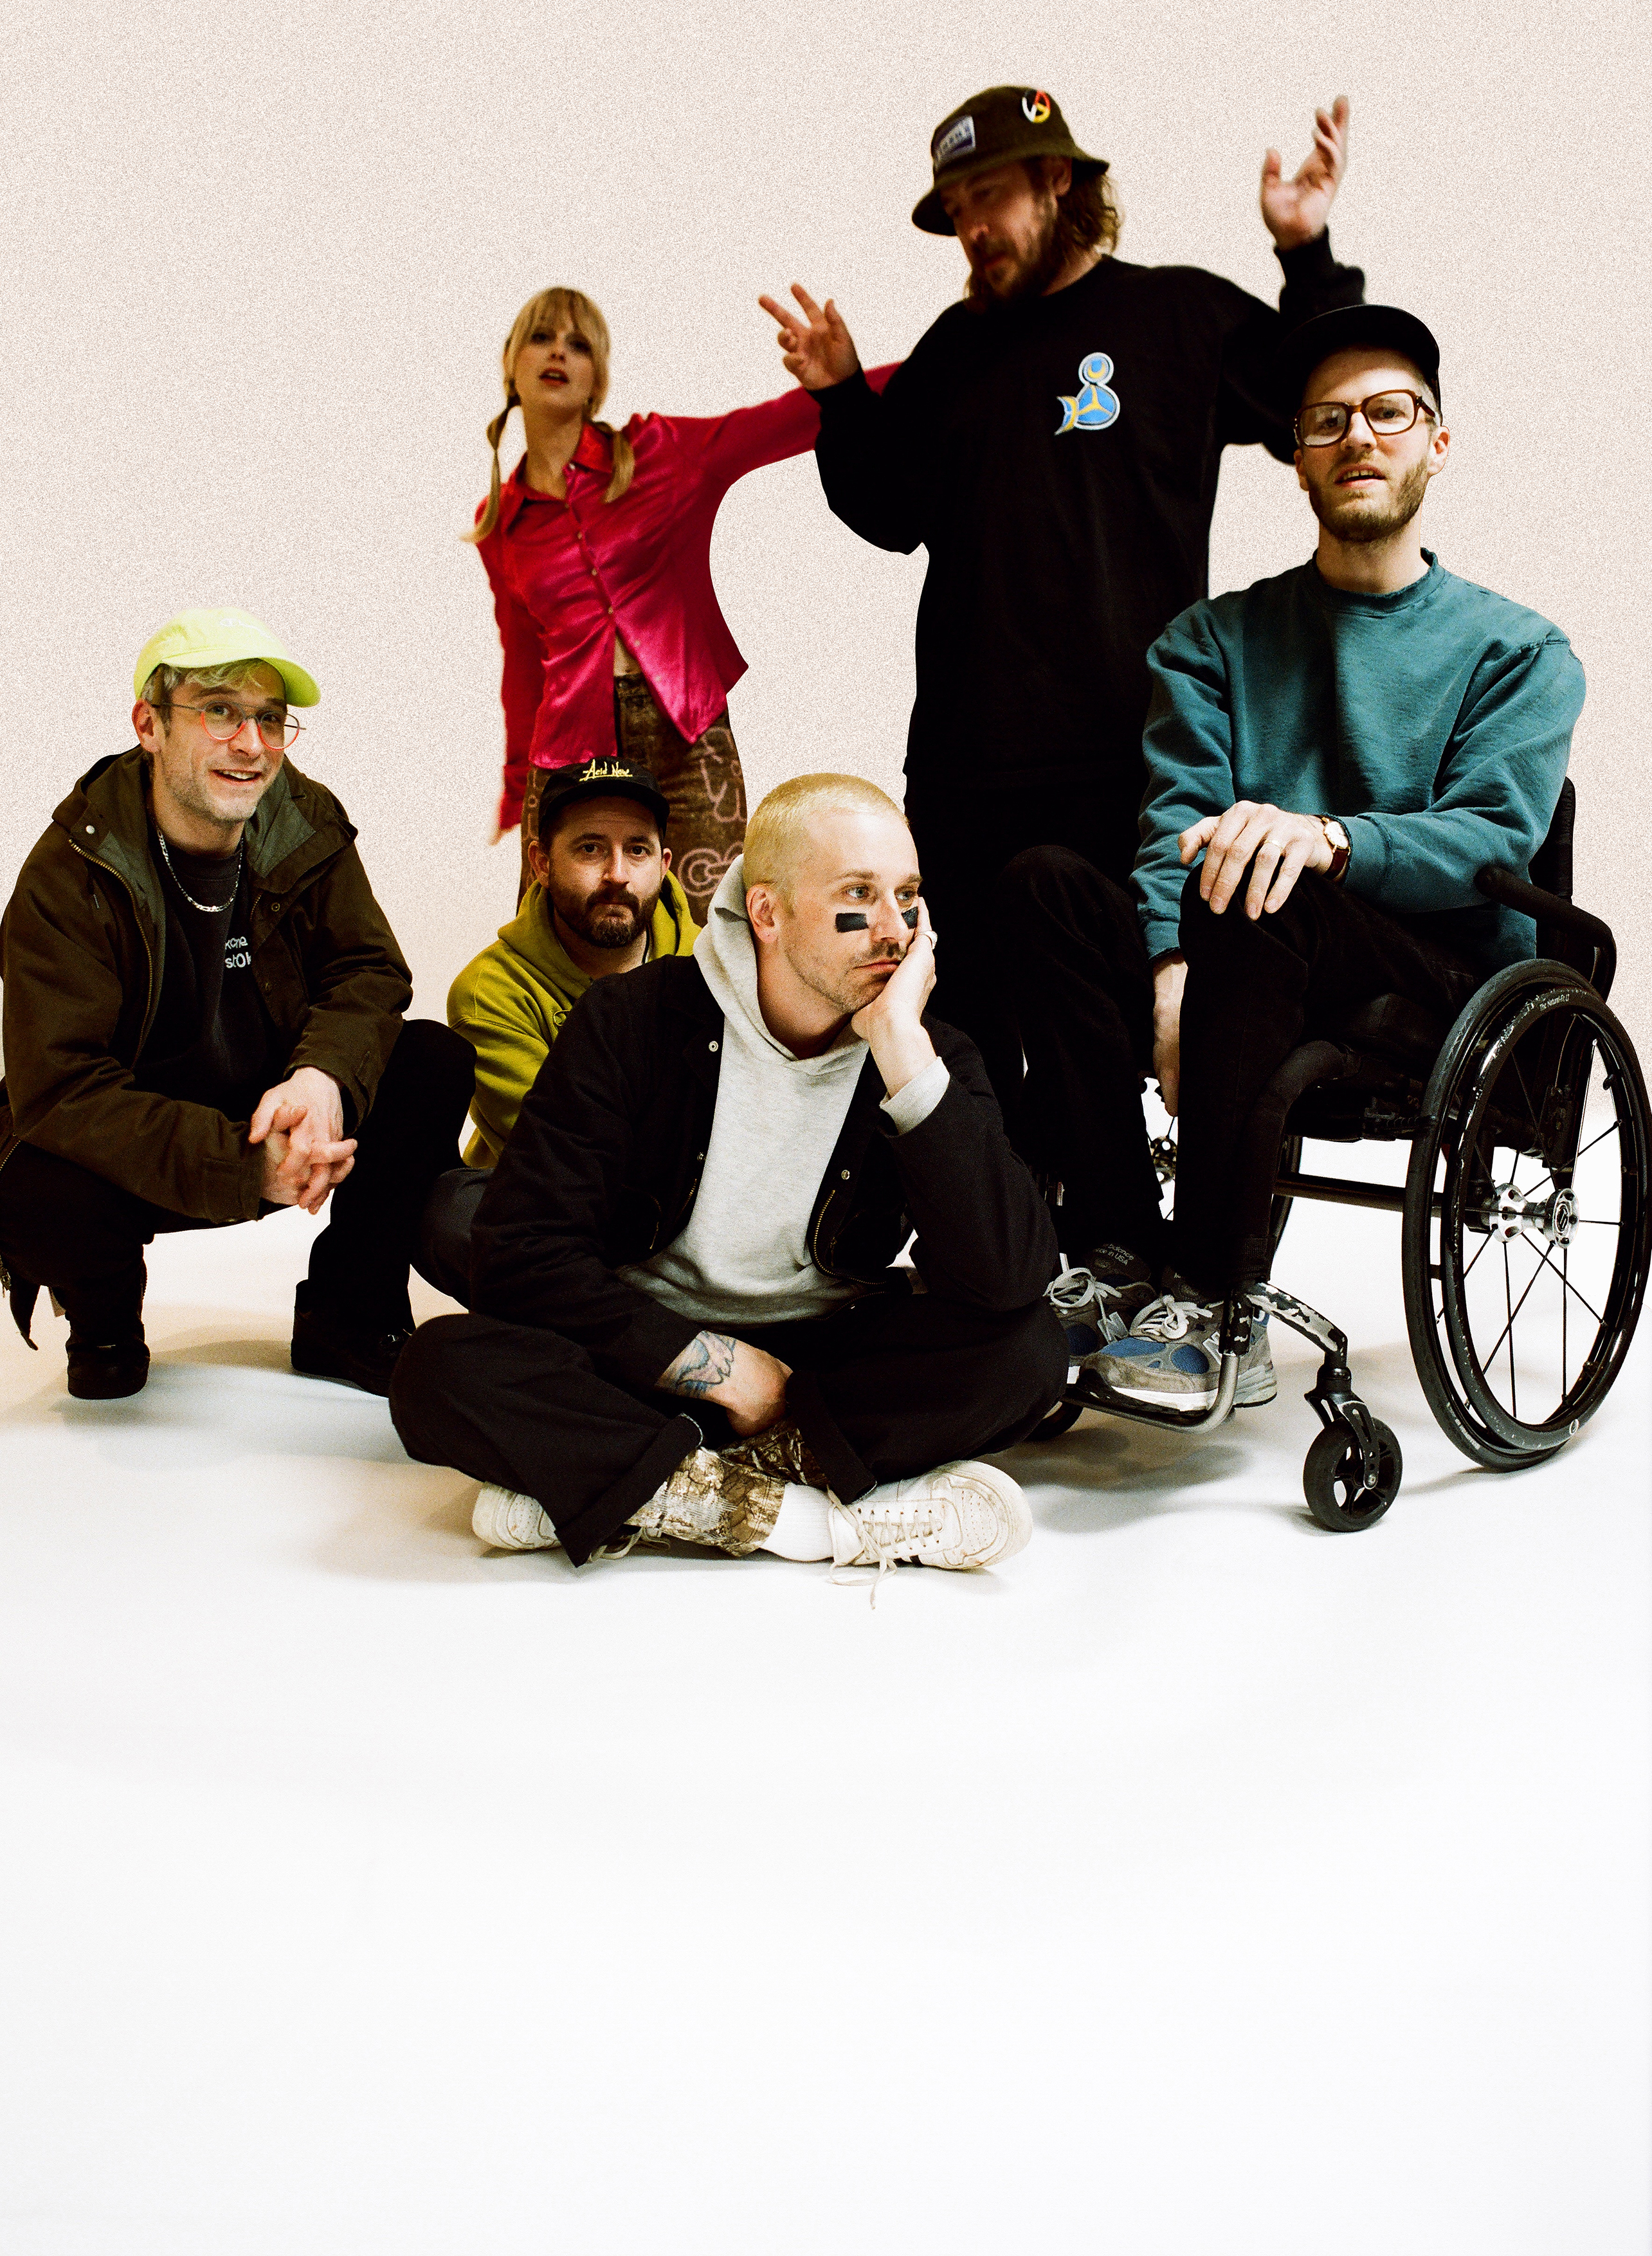 Portugal. The Man Tie The Record For The Most Weeks On This Chart With  'Feel It Still